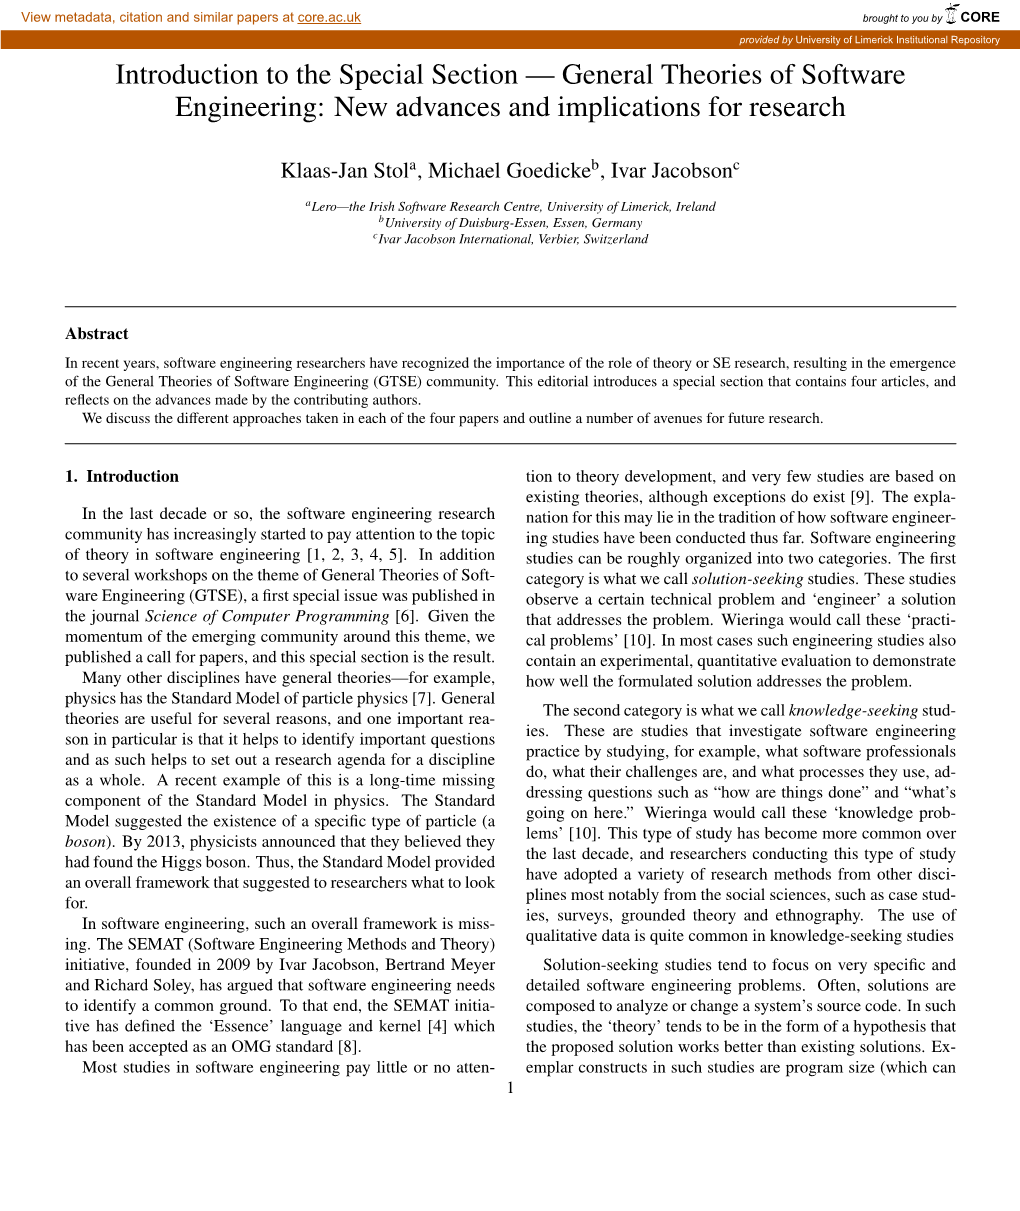 General Theories of Software Engineering: New Advances and Implications for Research